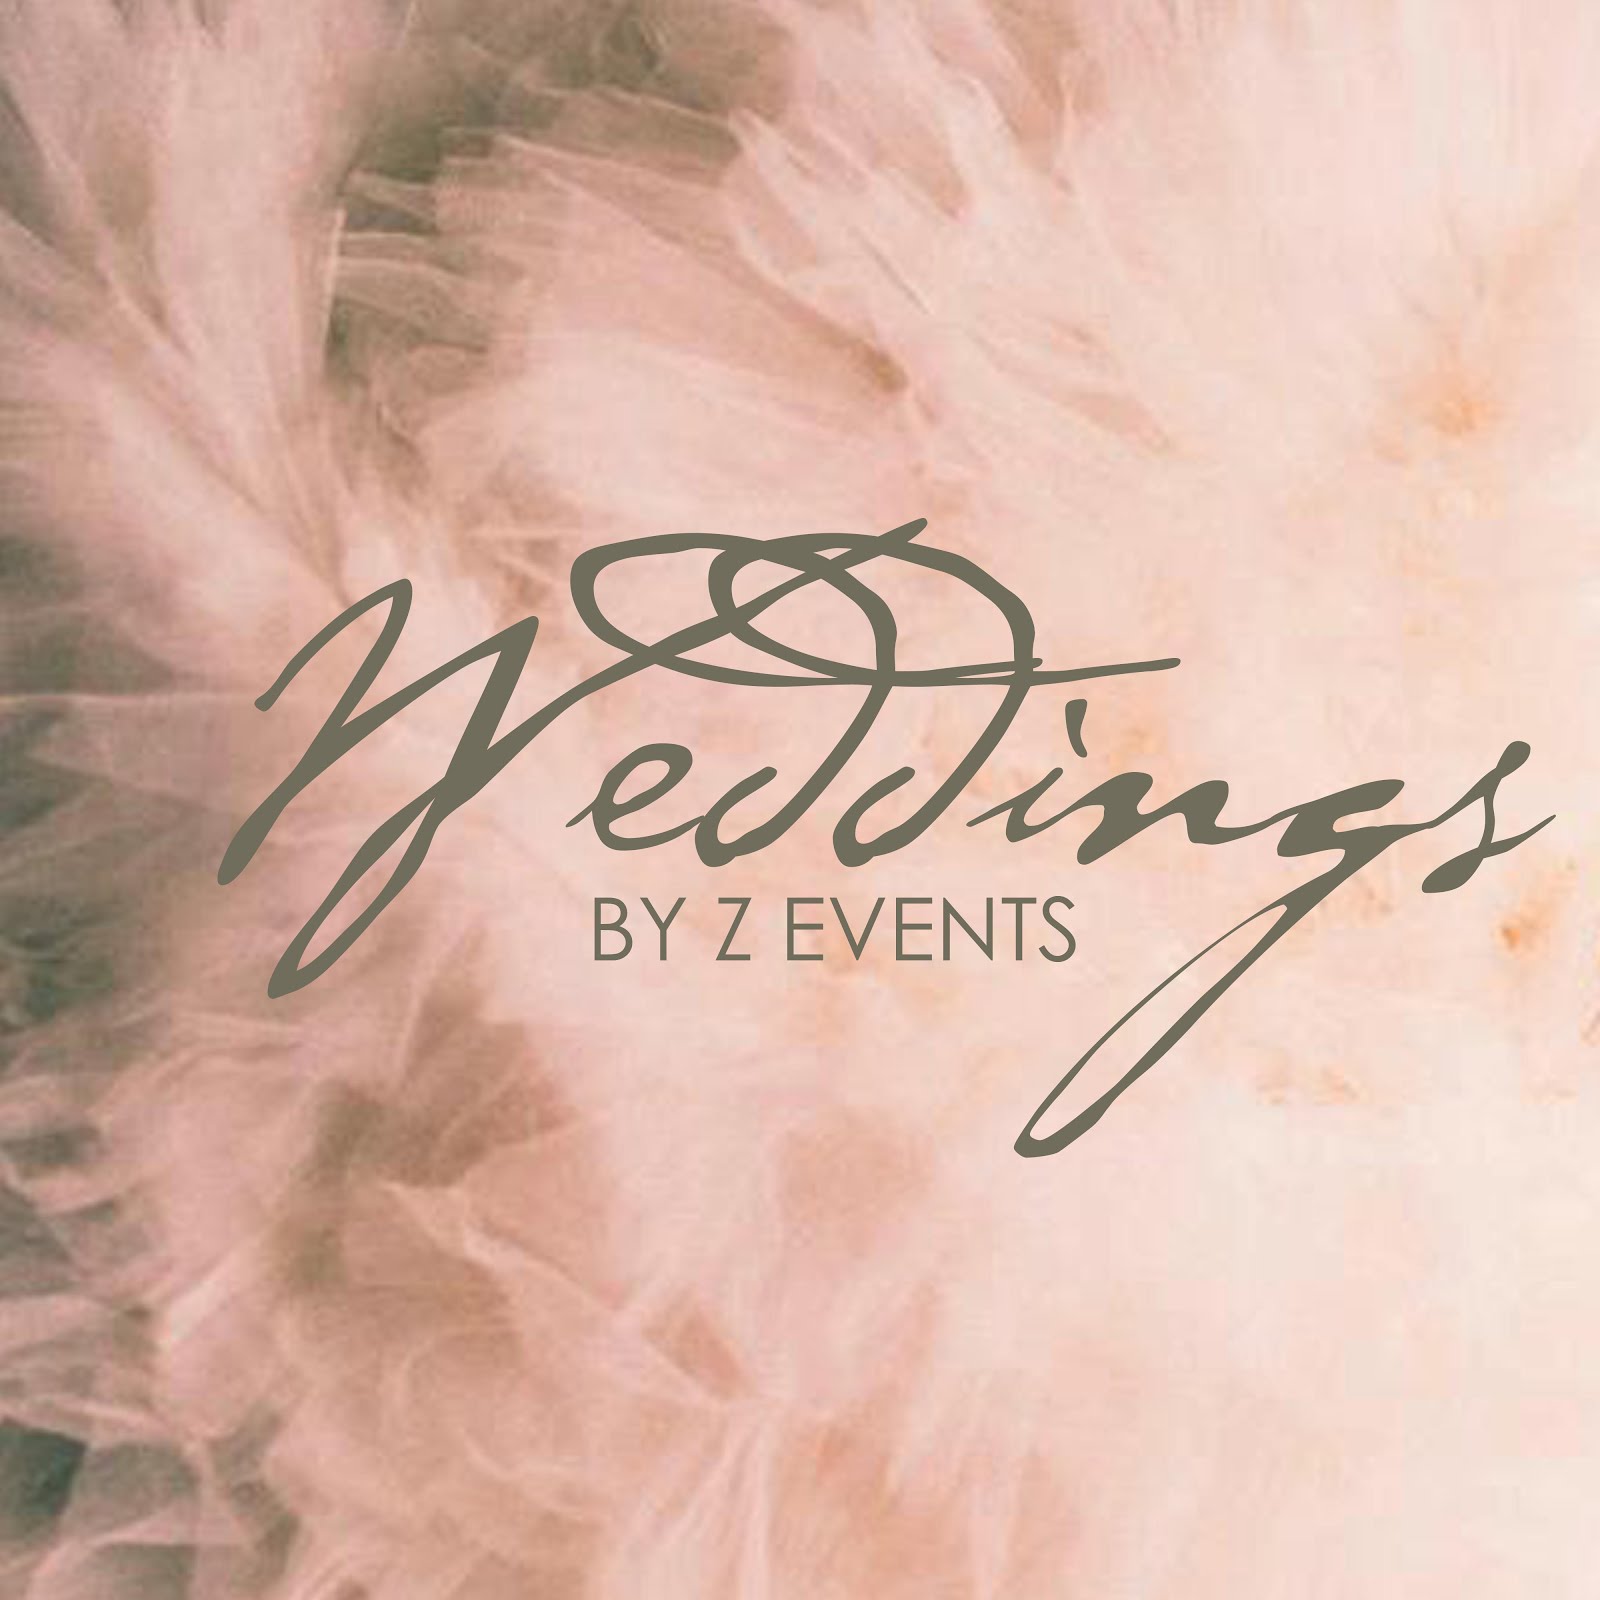 Weddings by Z Events